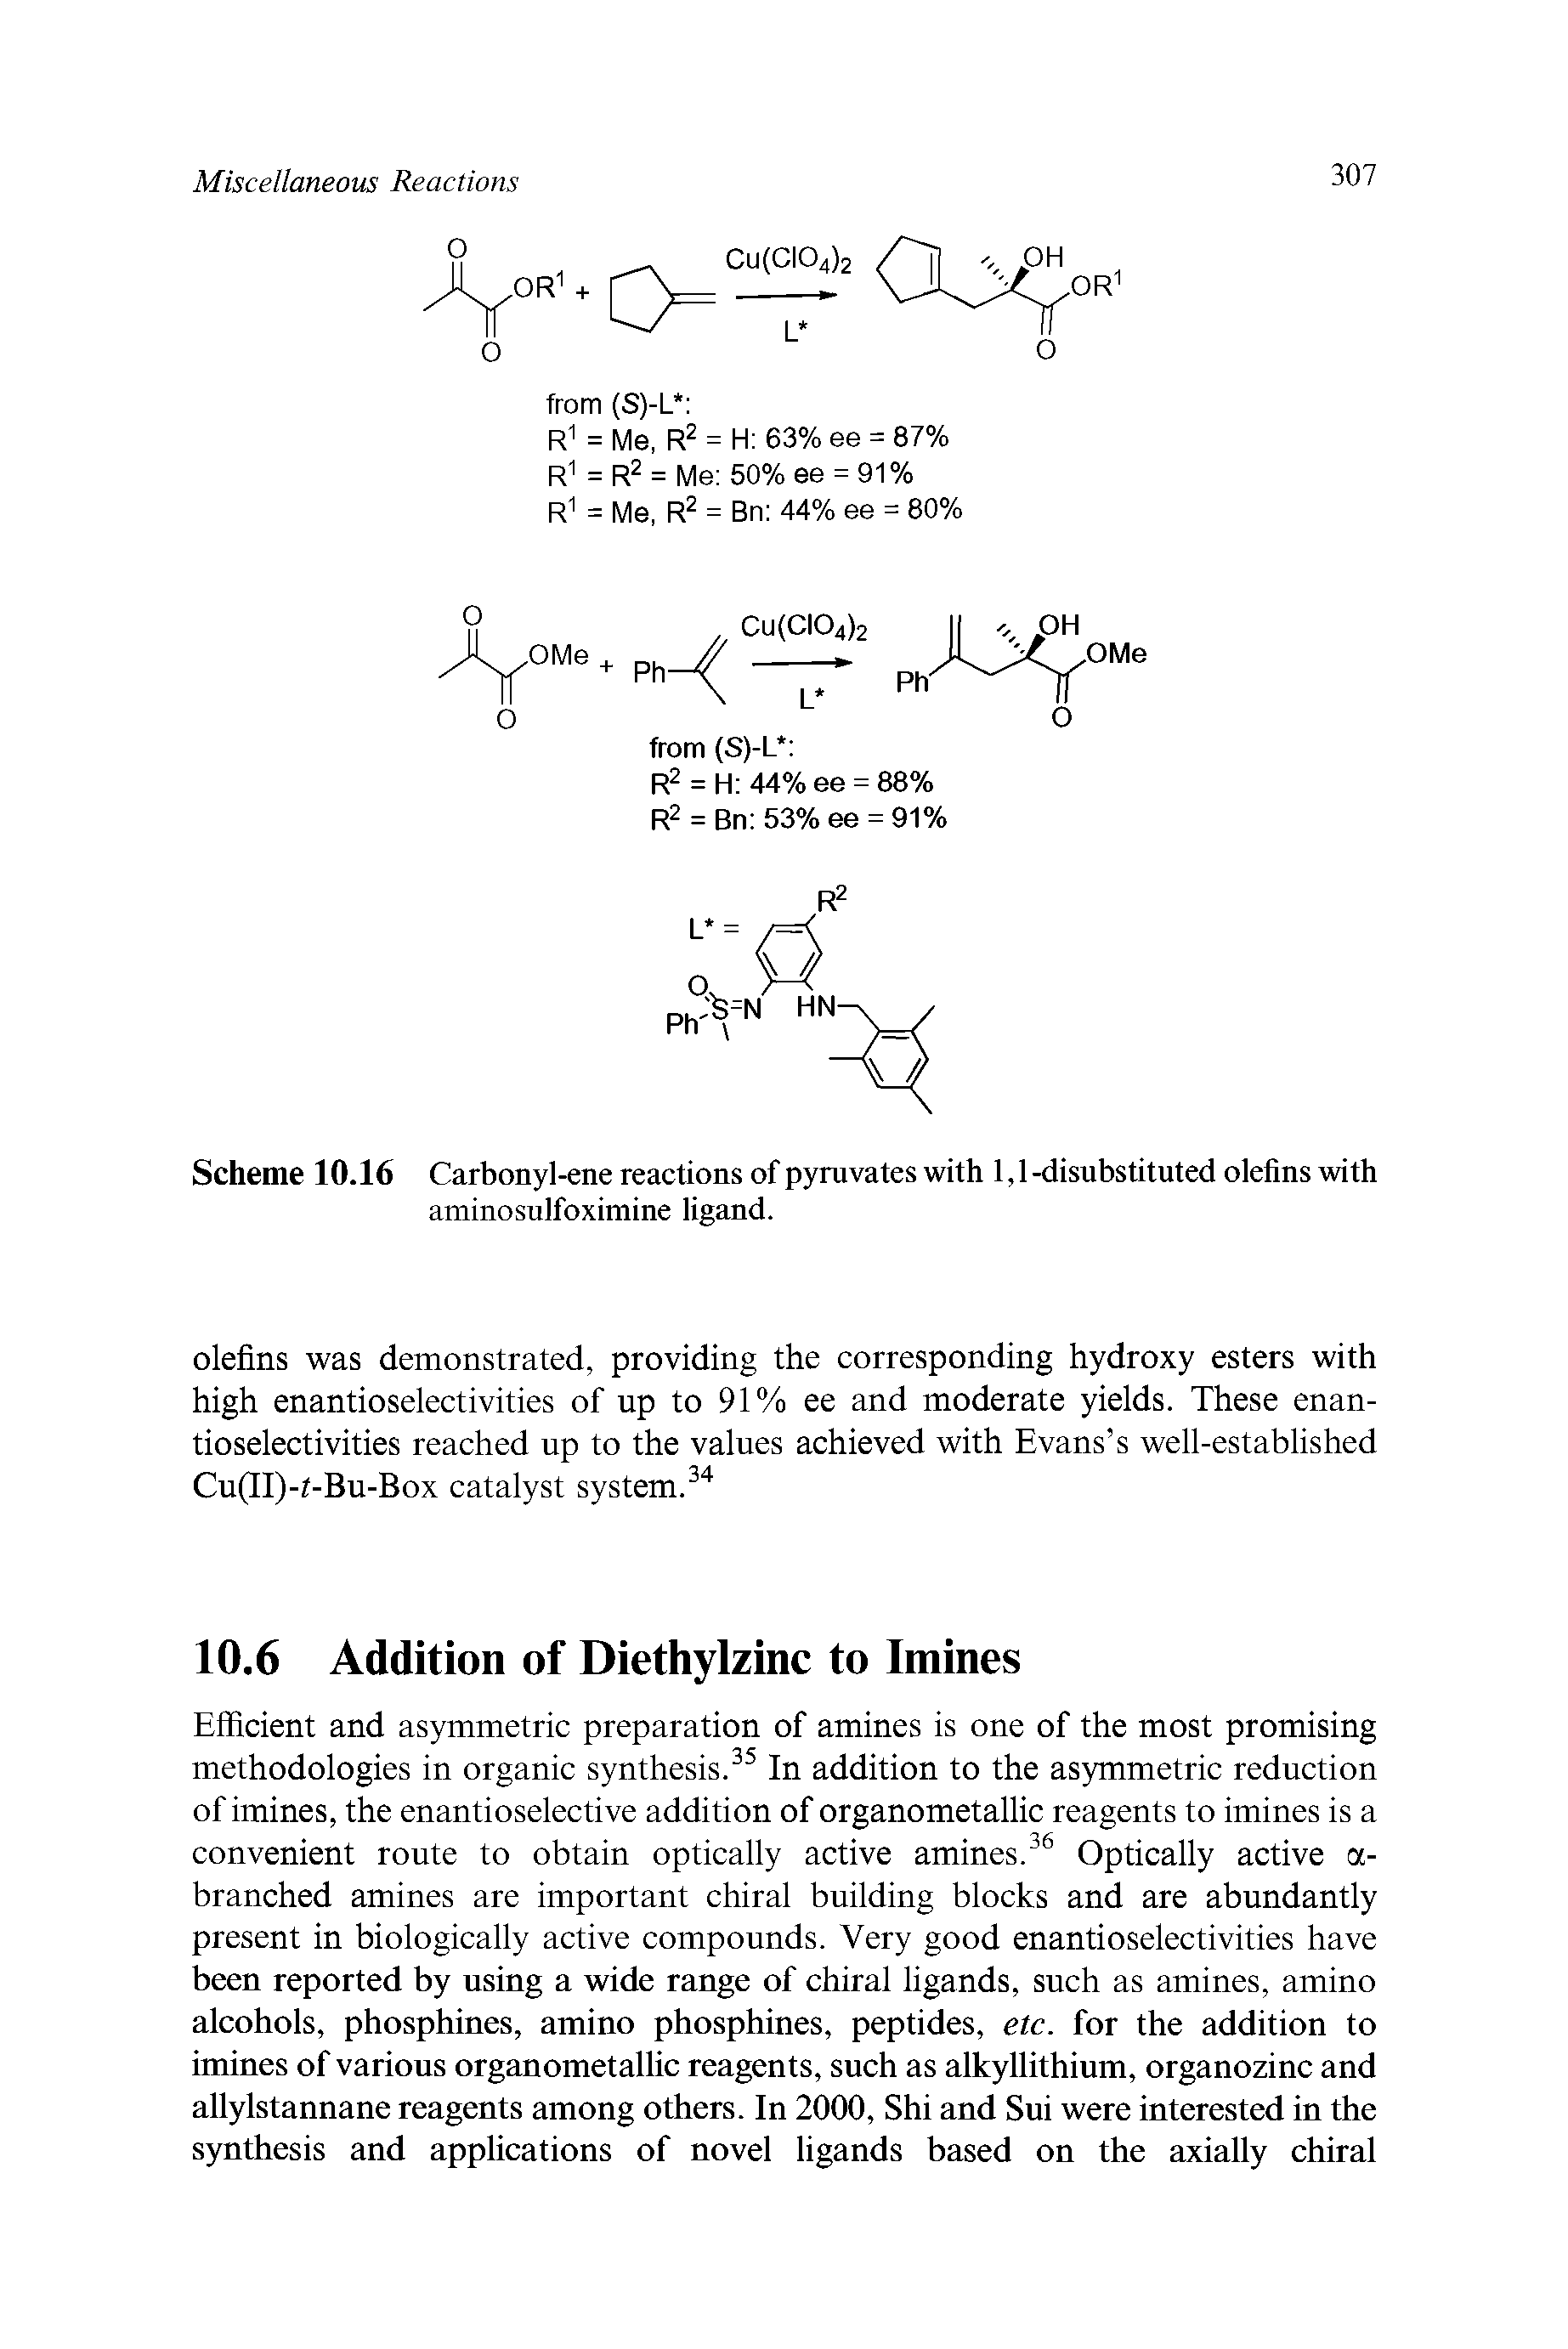 Scheme 10.16 Carbonyl-ene reactions of pyruvates with 1,1-disubstituted olefins with aminosulfoximine ligand.